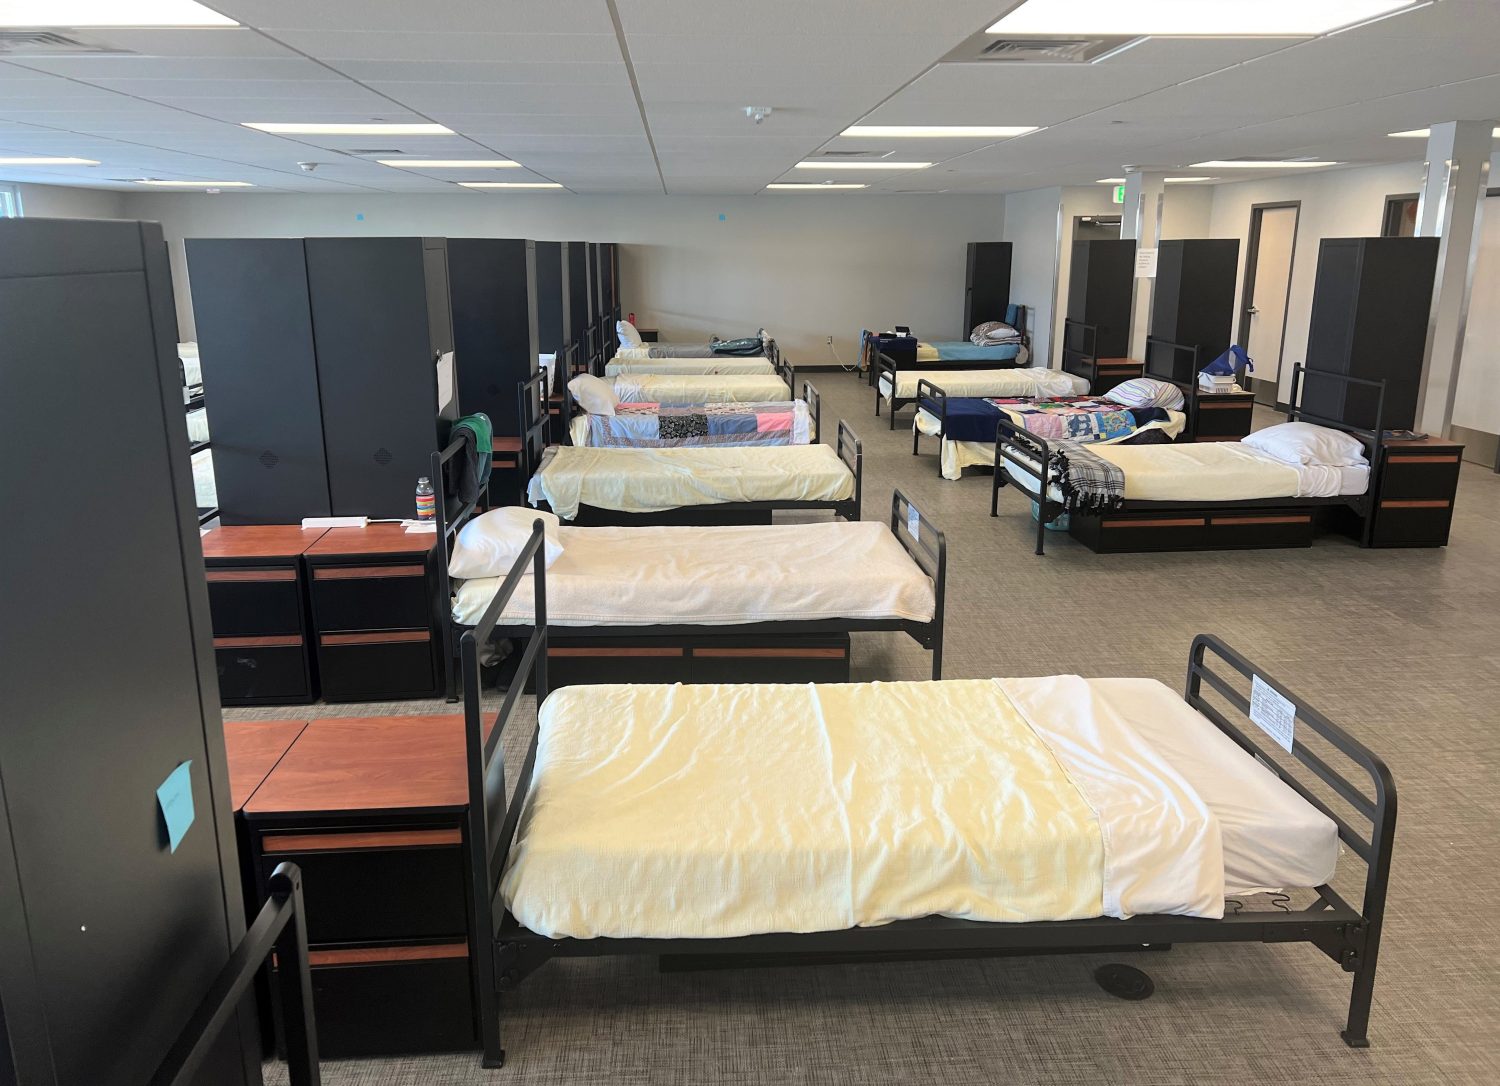 large room in homeless shelter with multiple beds